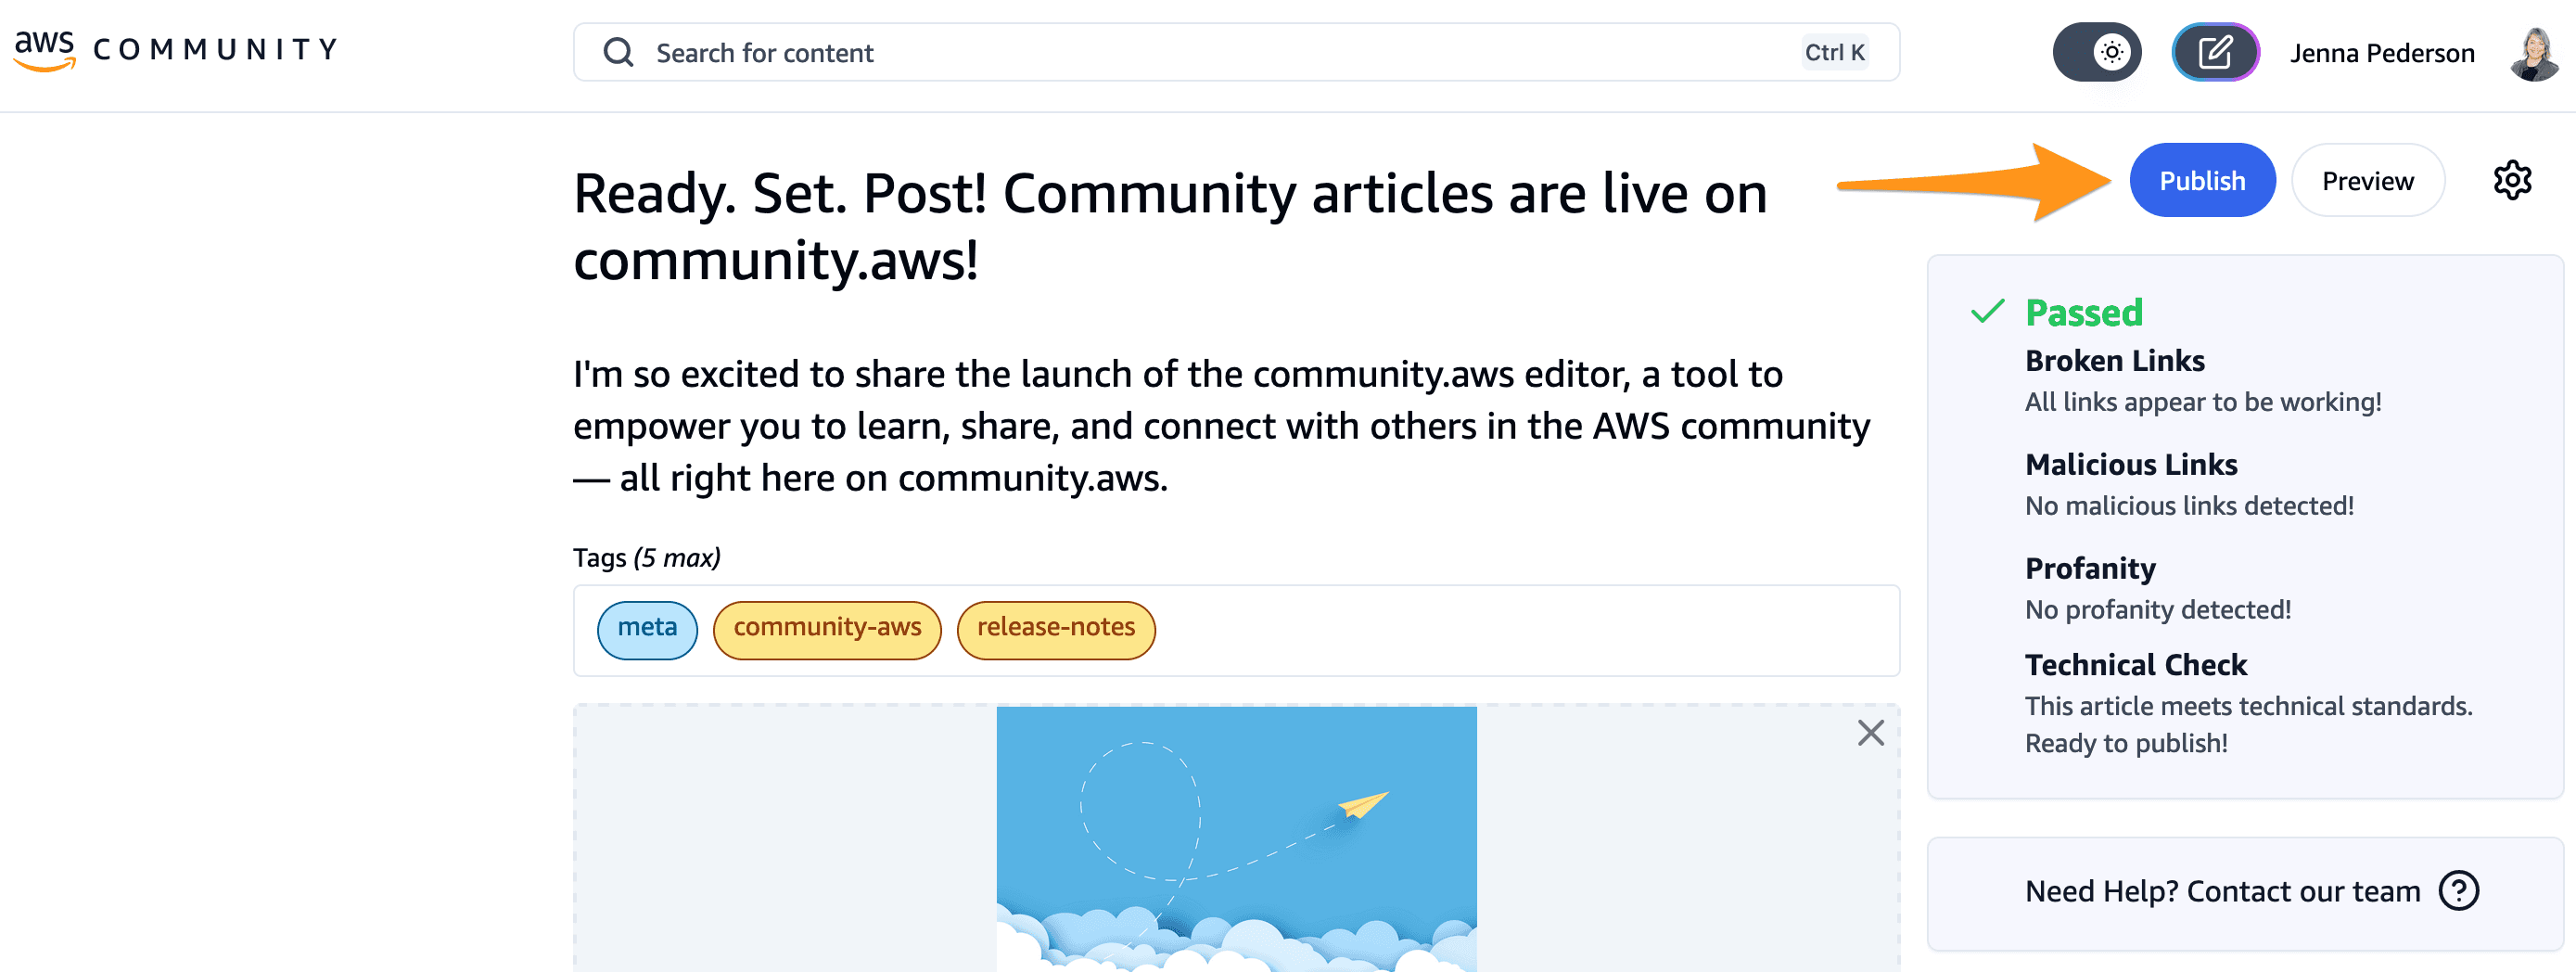 Edit page showing an orange arrow pointing to the Publish button.